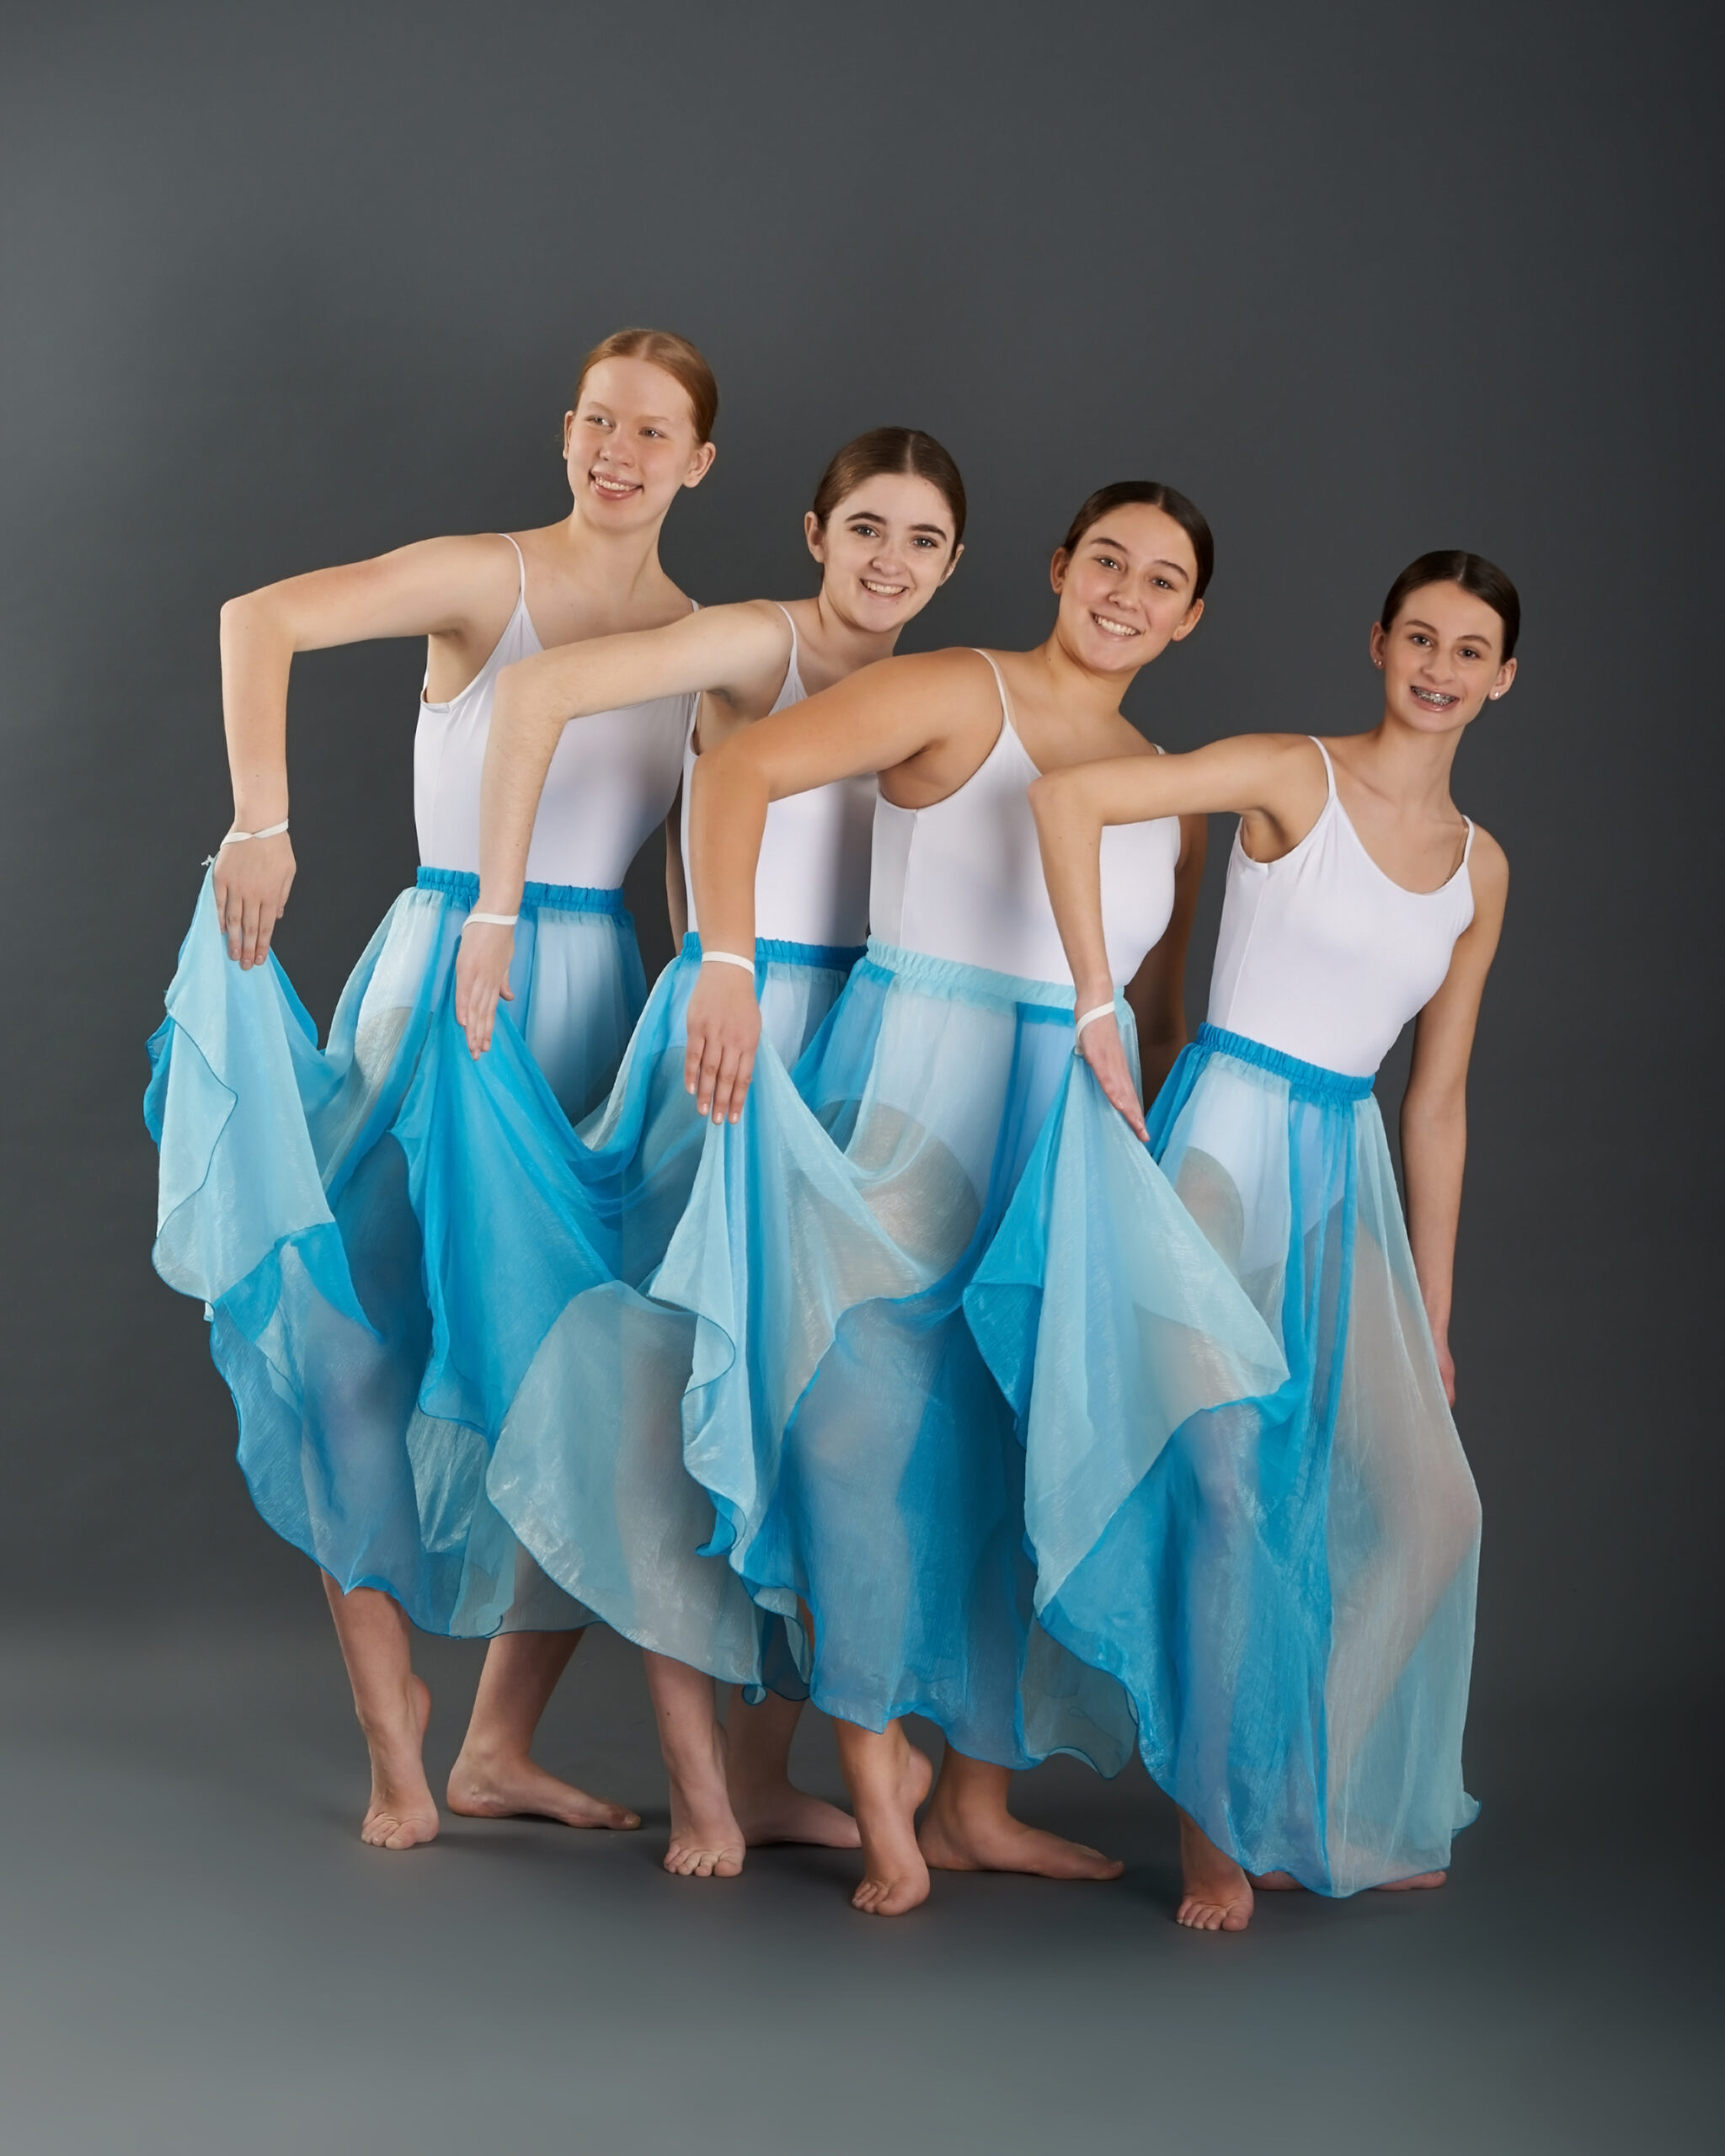 dance ensemble dancers posing in blue and white dresses